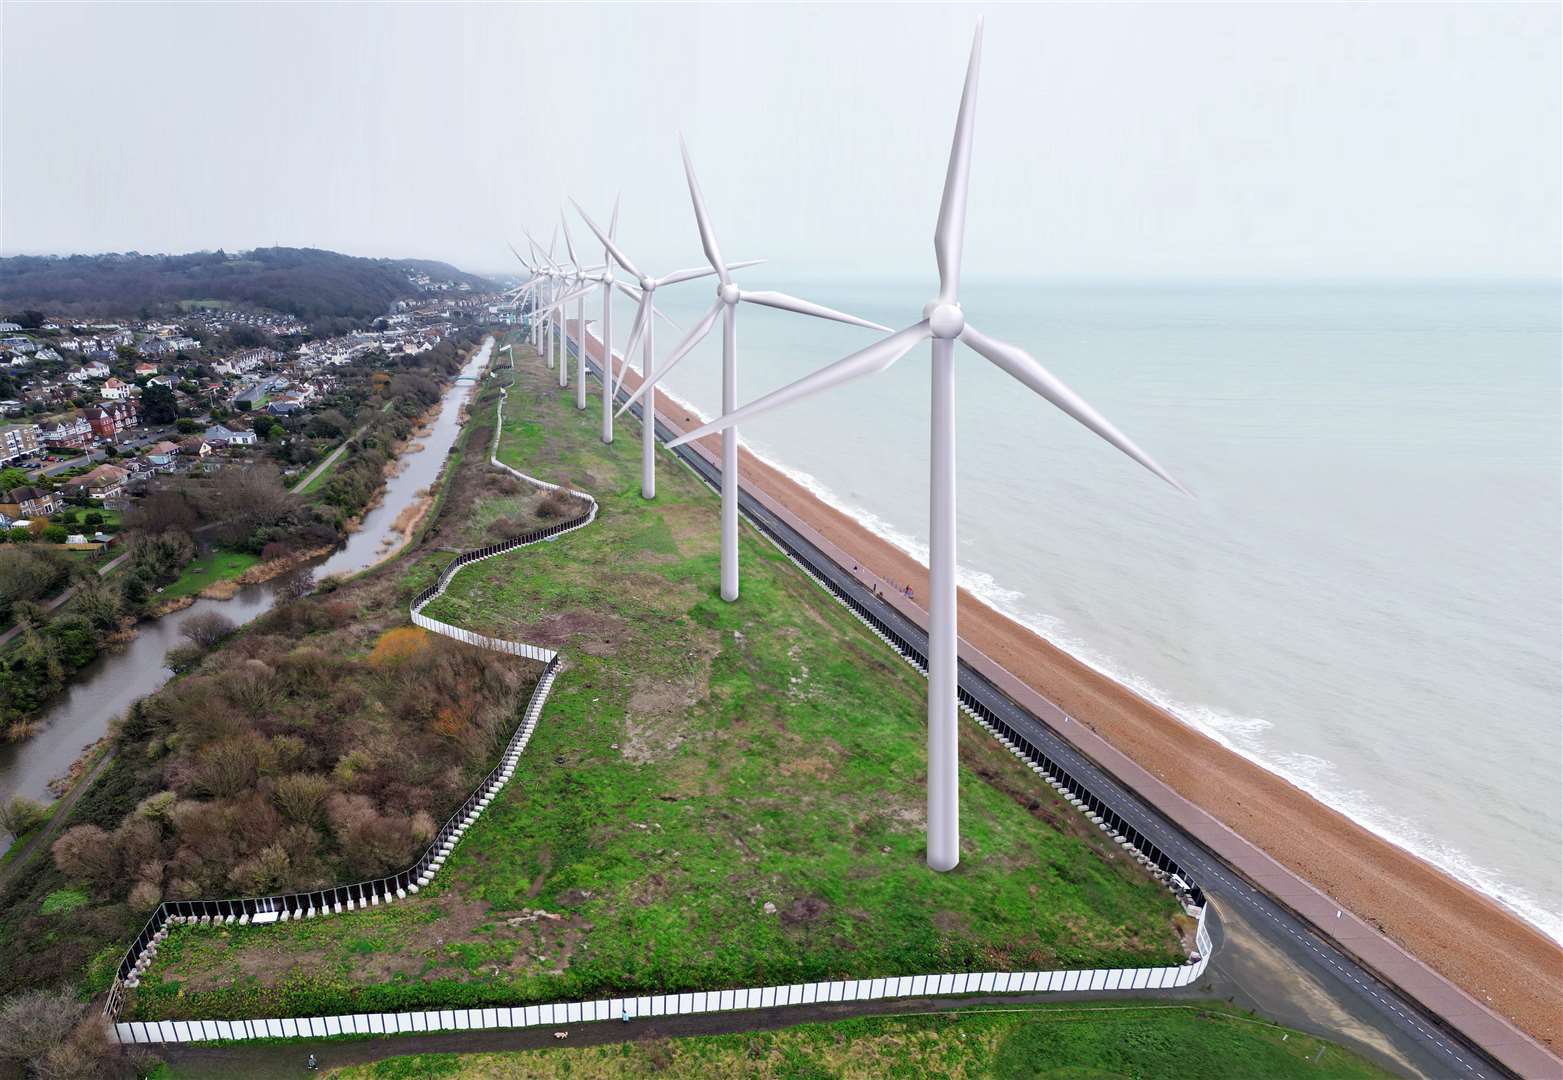 A mocked-up image showing how a wind farm could look on Princes Parade in Hythe